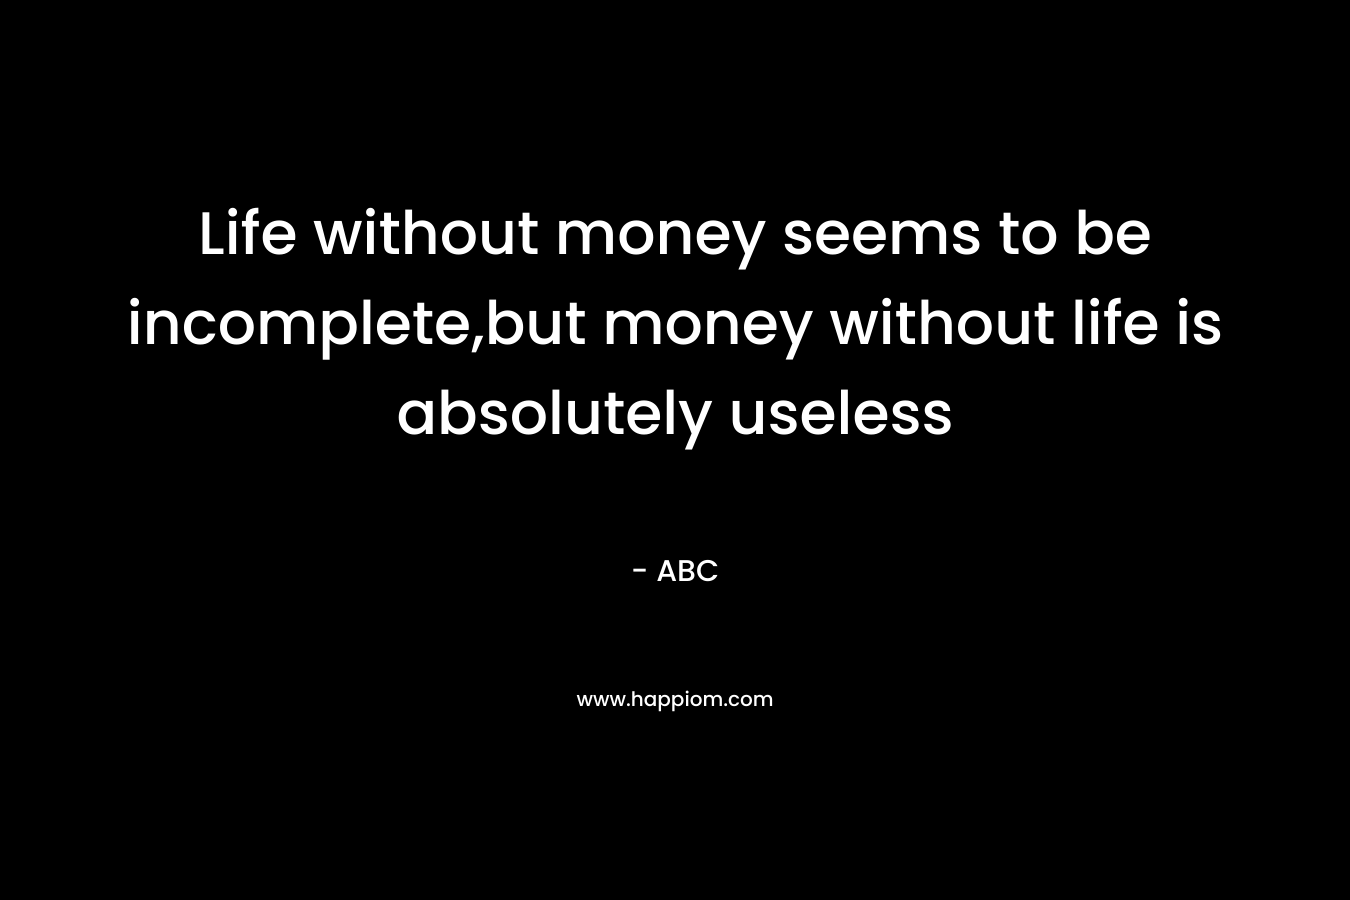 Life without money seems to be incomplete,but money without life is absolutely useless